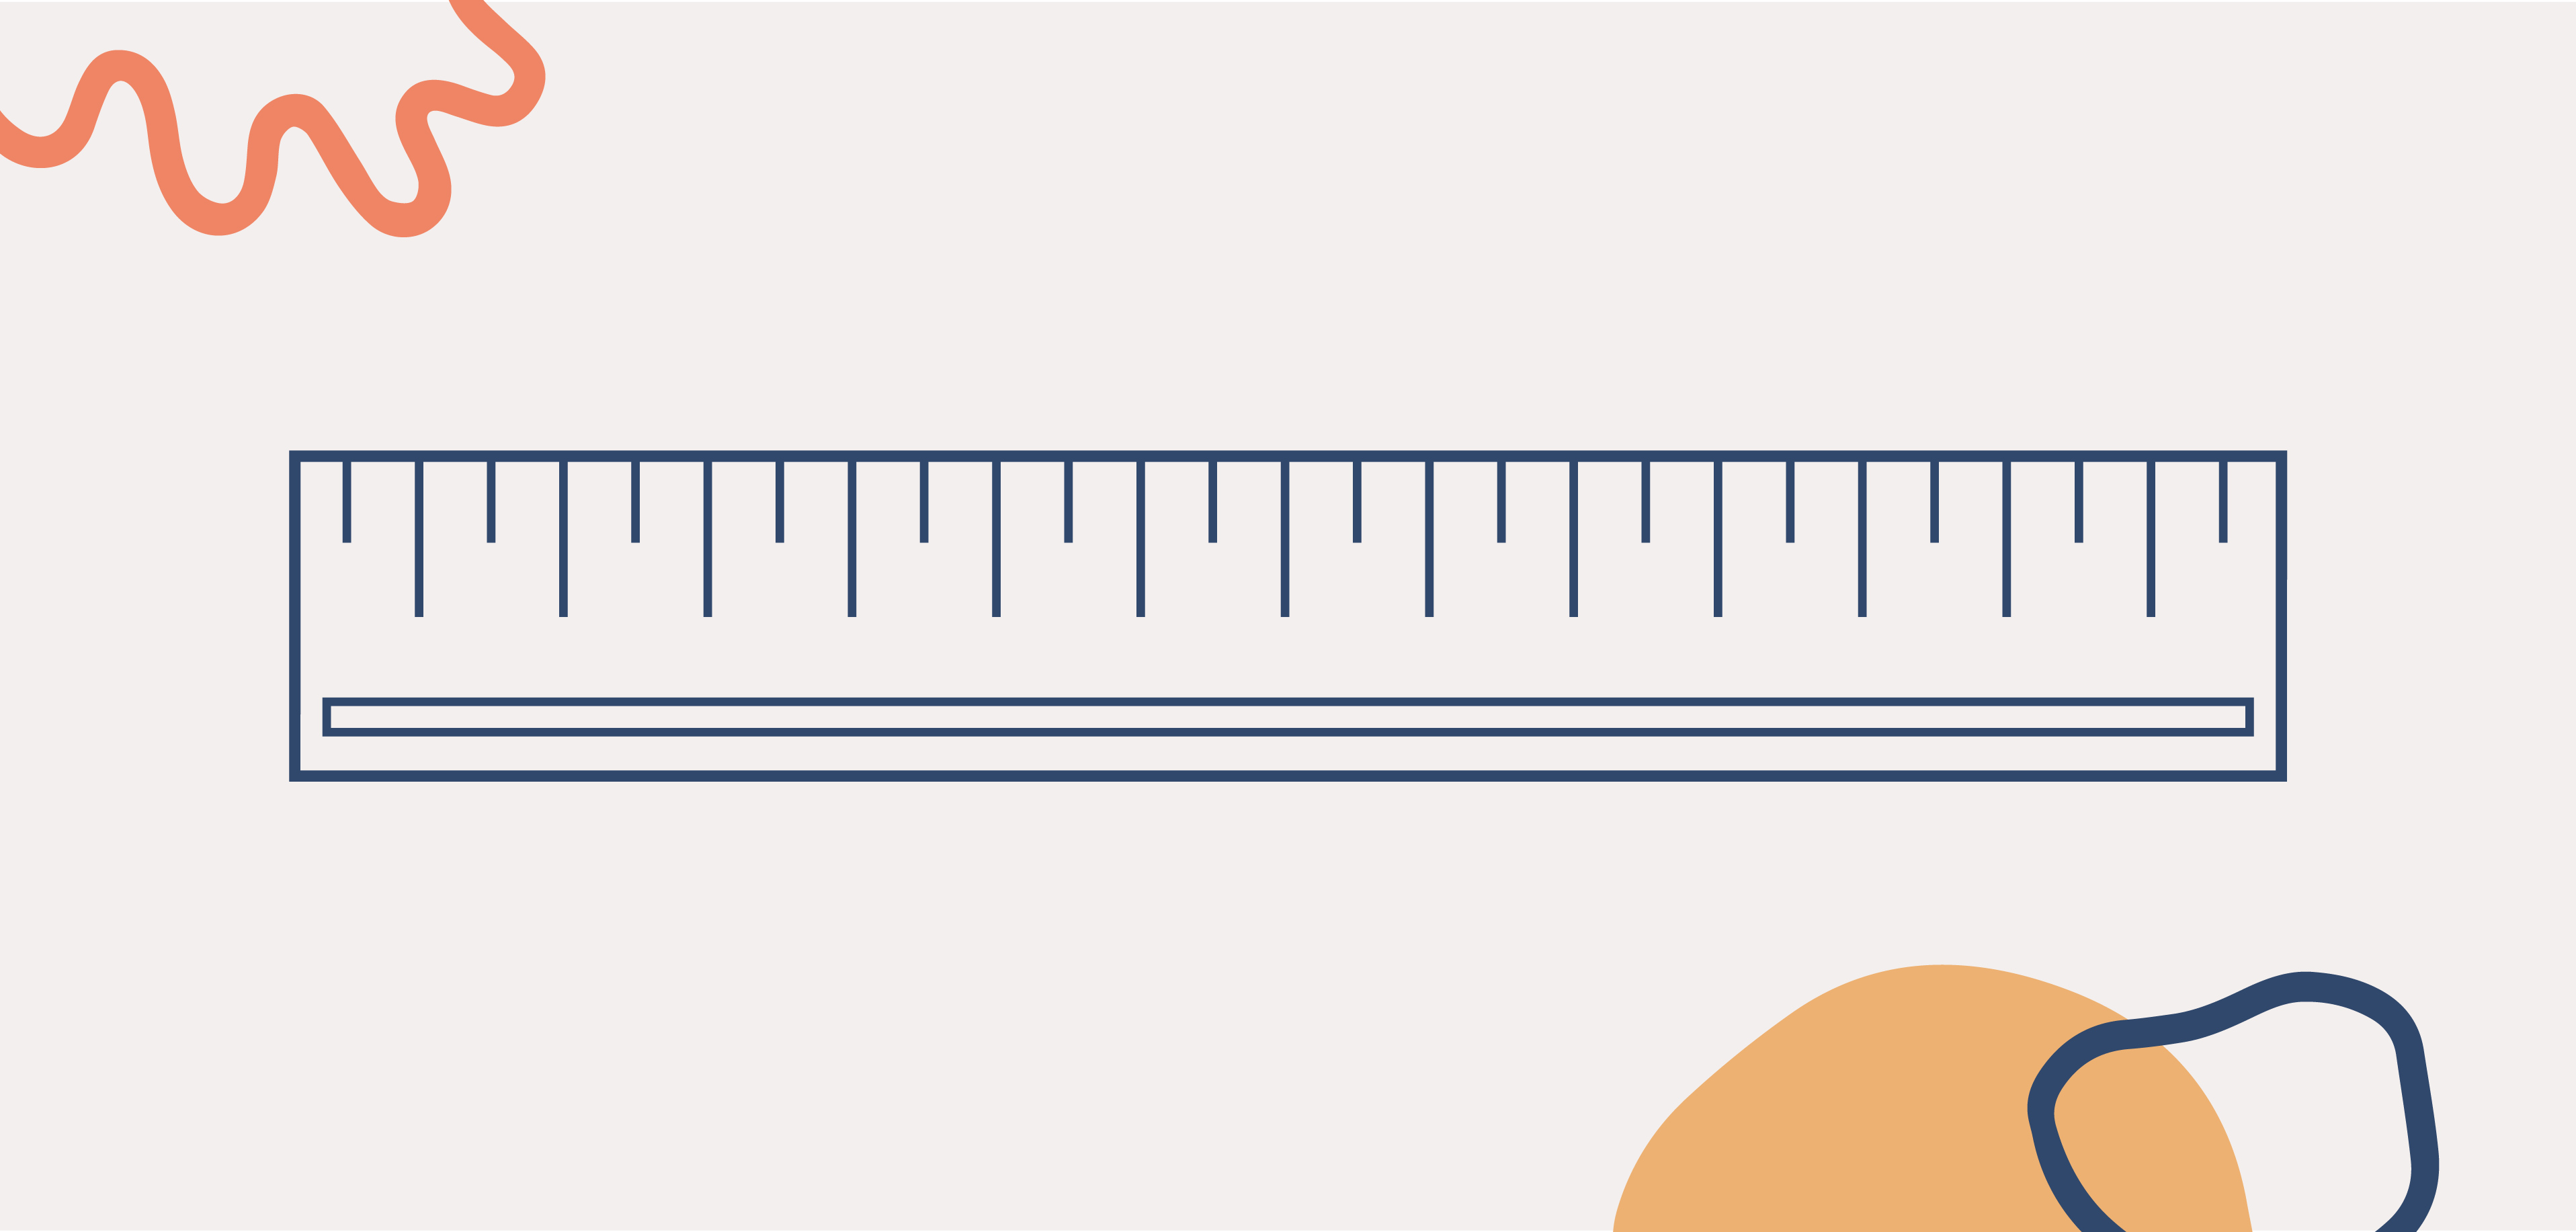 Illustration showing a measuring device commonly known as a ruler or straight edge